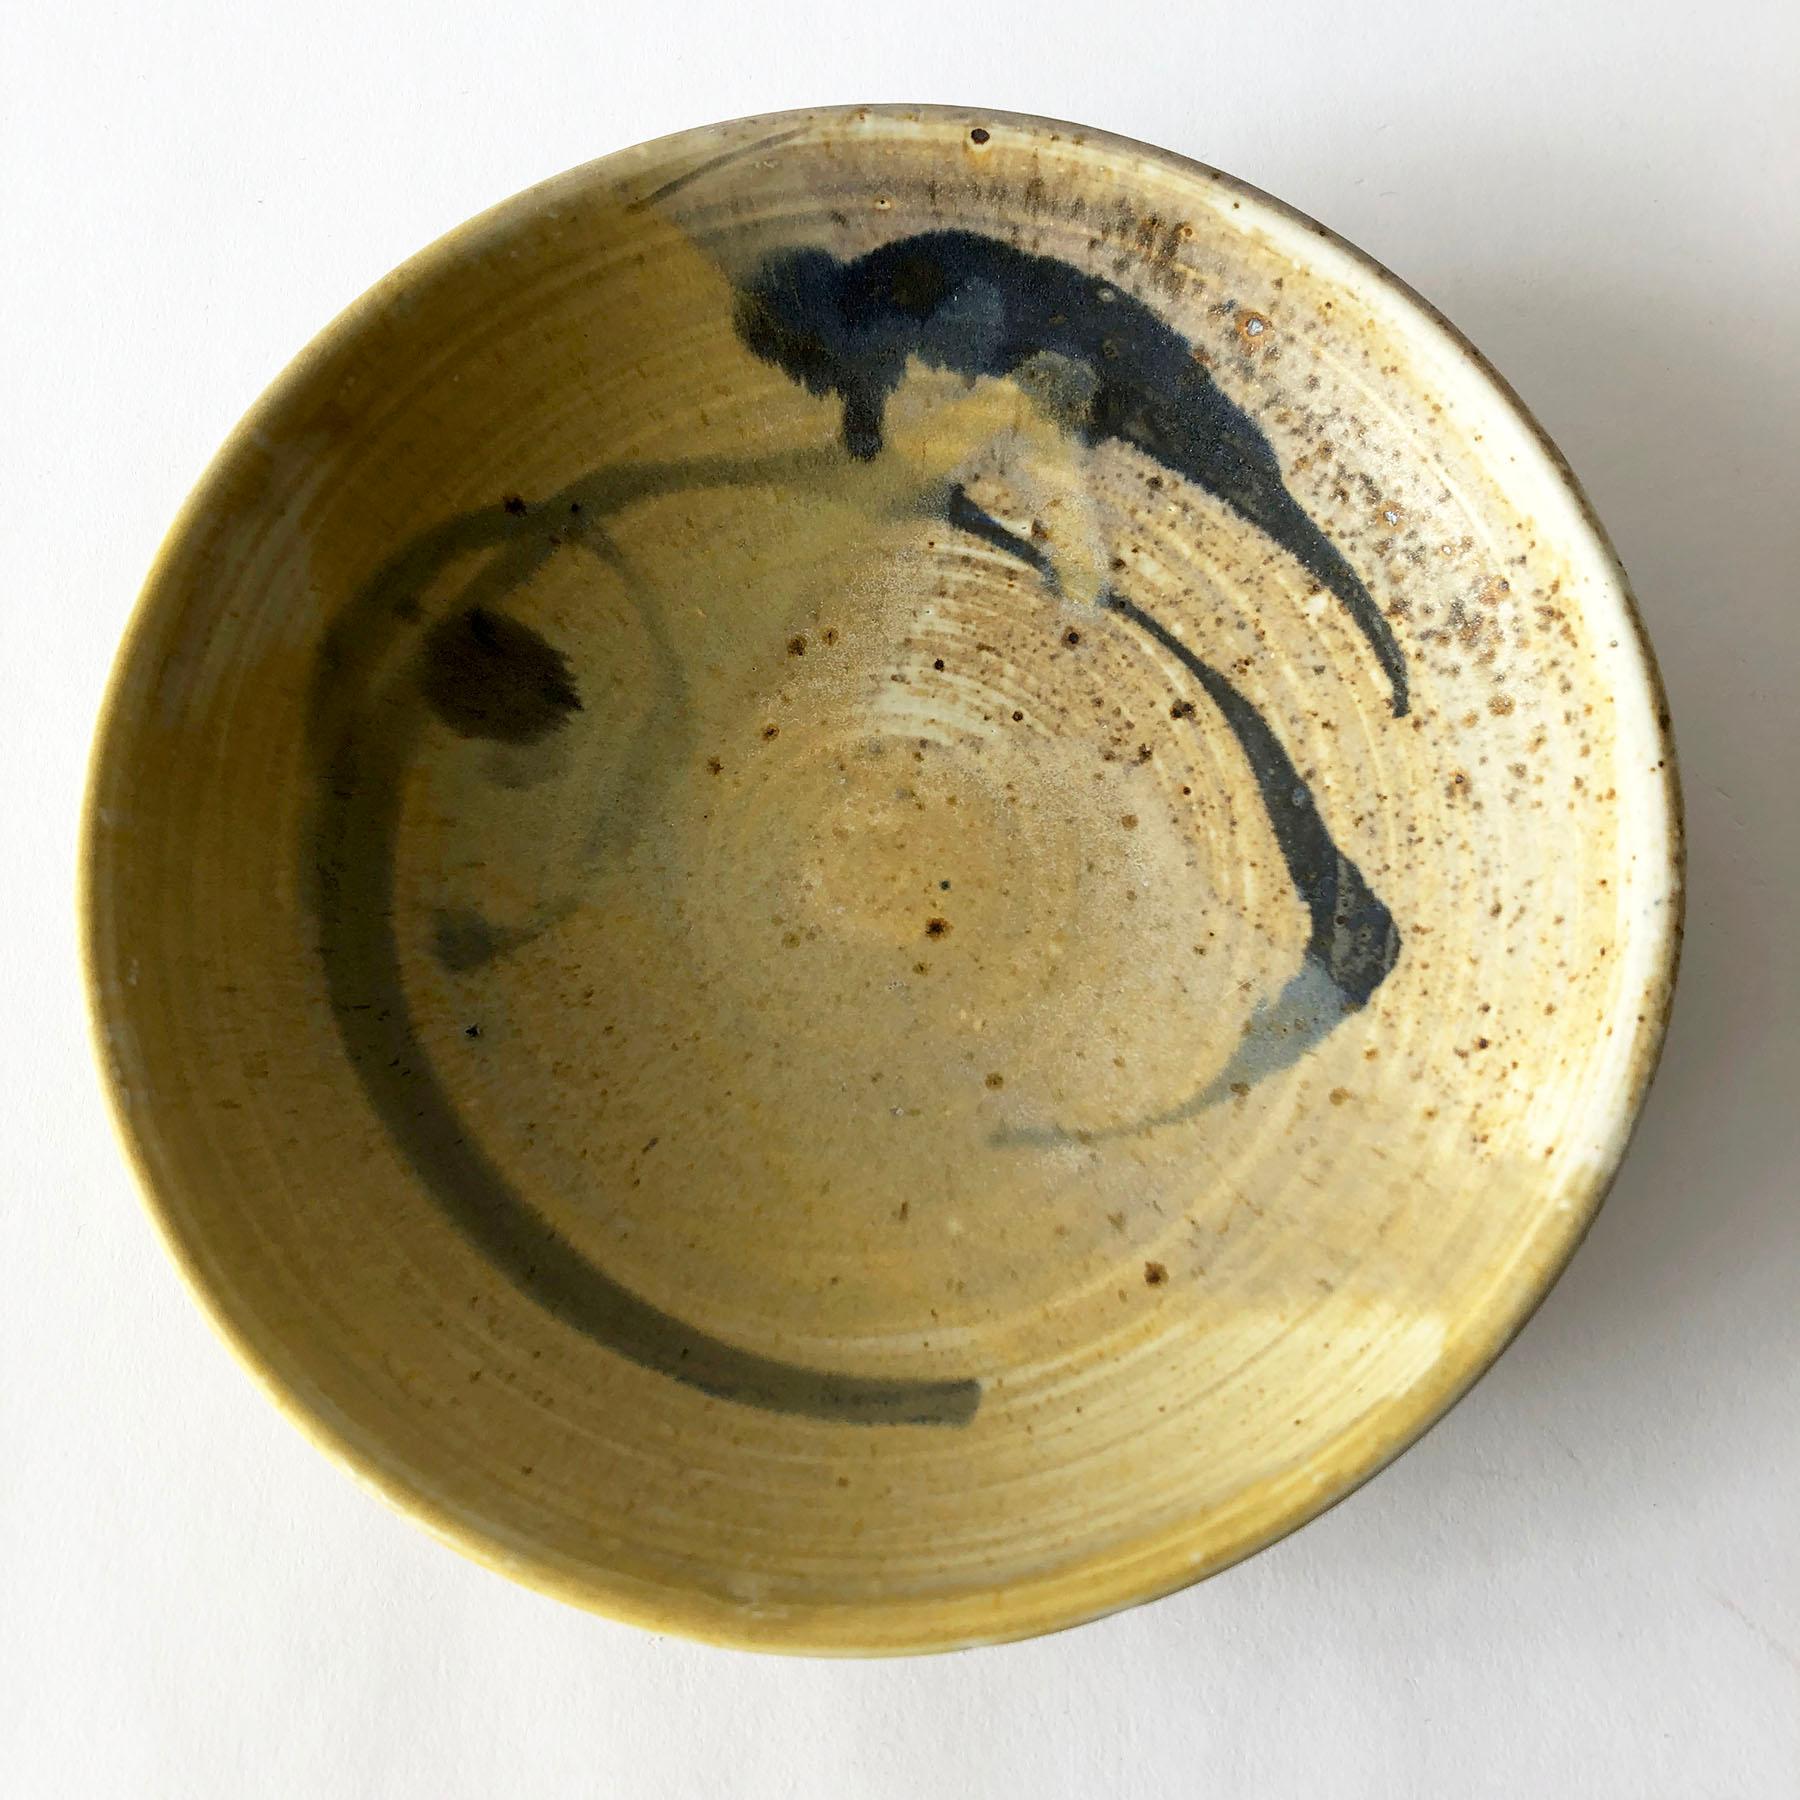 Studio pottery low bowl with abstract design created by Toshiko Takaezu, of Honolulu, Hawaii. Bowl measures 2